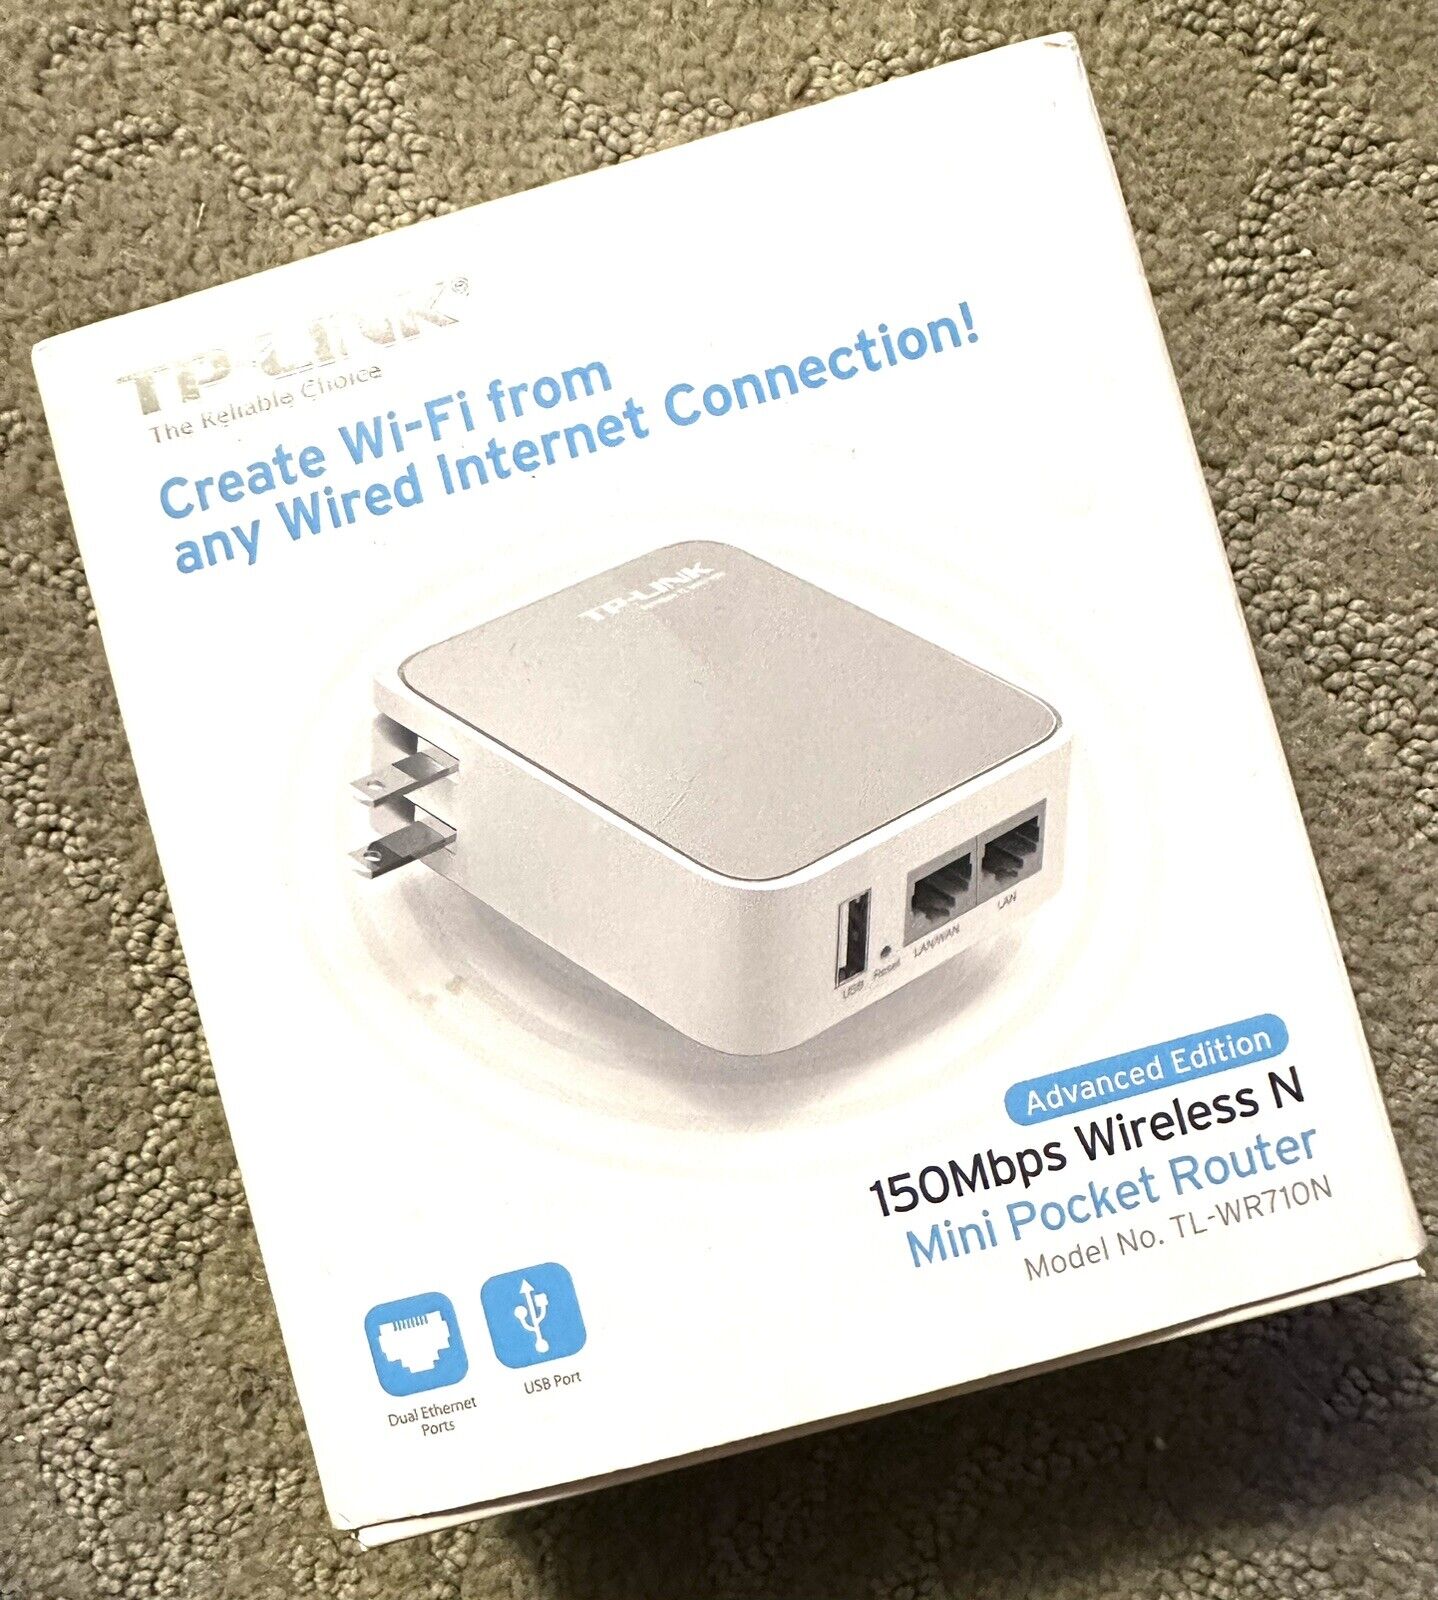 TP-LINK TL-WR710N 150Mbps Wireless N Mini Pocket Router. NEW